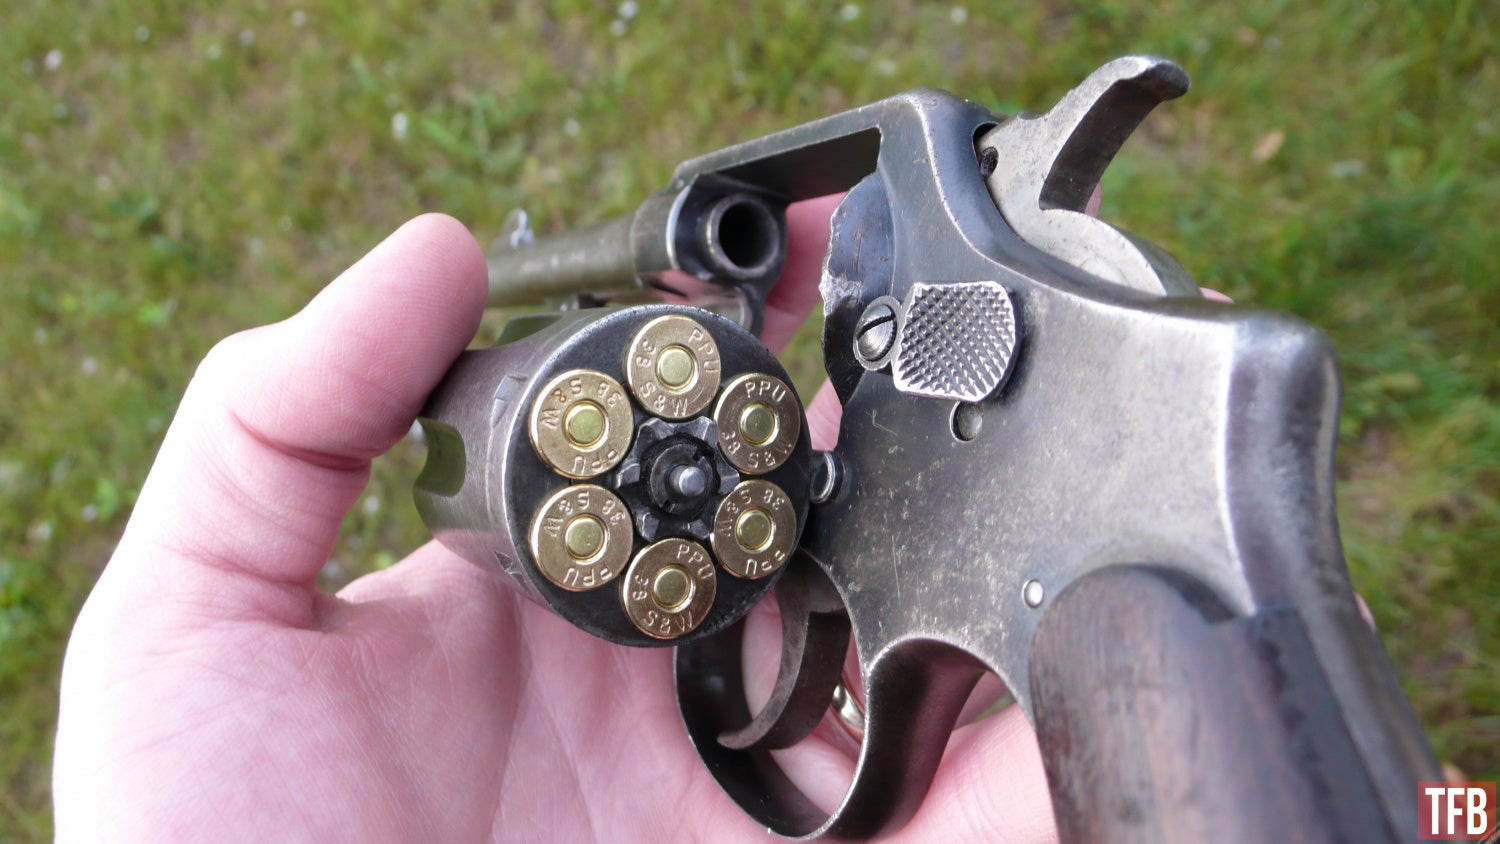 Lend-Lease S&W Victory revolver